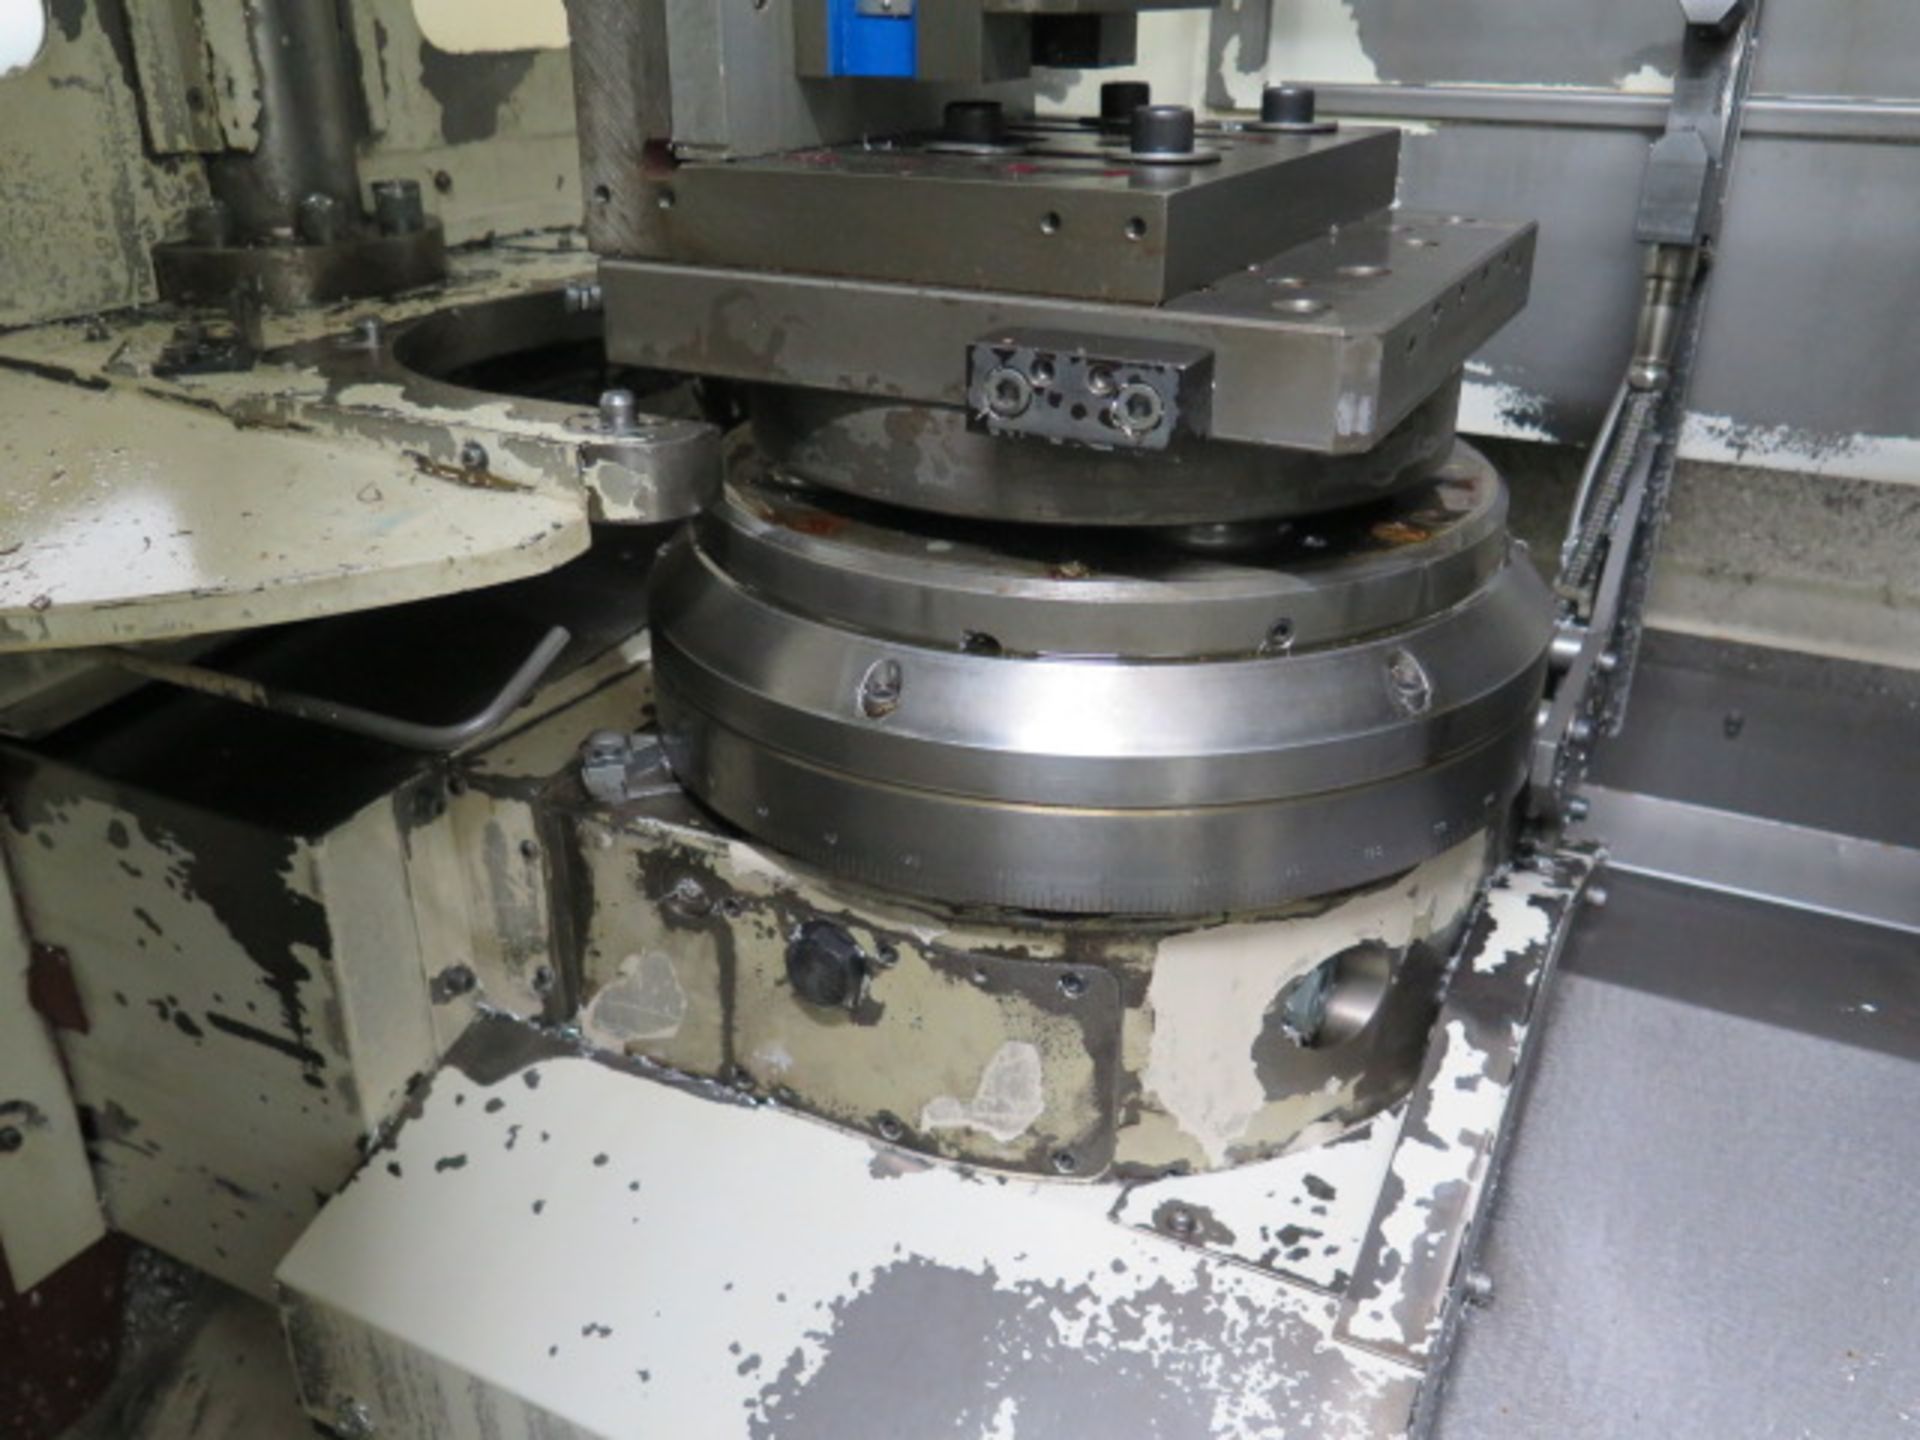 Kitamura Mycenter HX300iF 2-Paller 4-Axis CNC Horizontal Machining Center s/n 40975 SOLD AS IS - Image 6 of 26